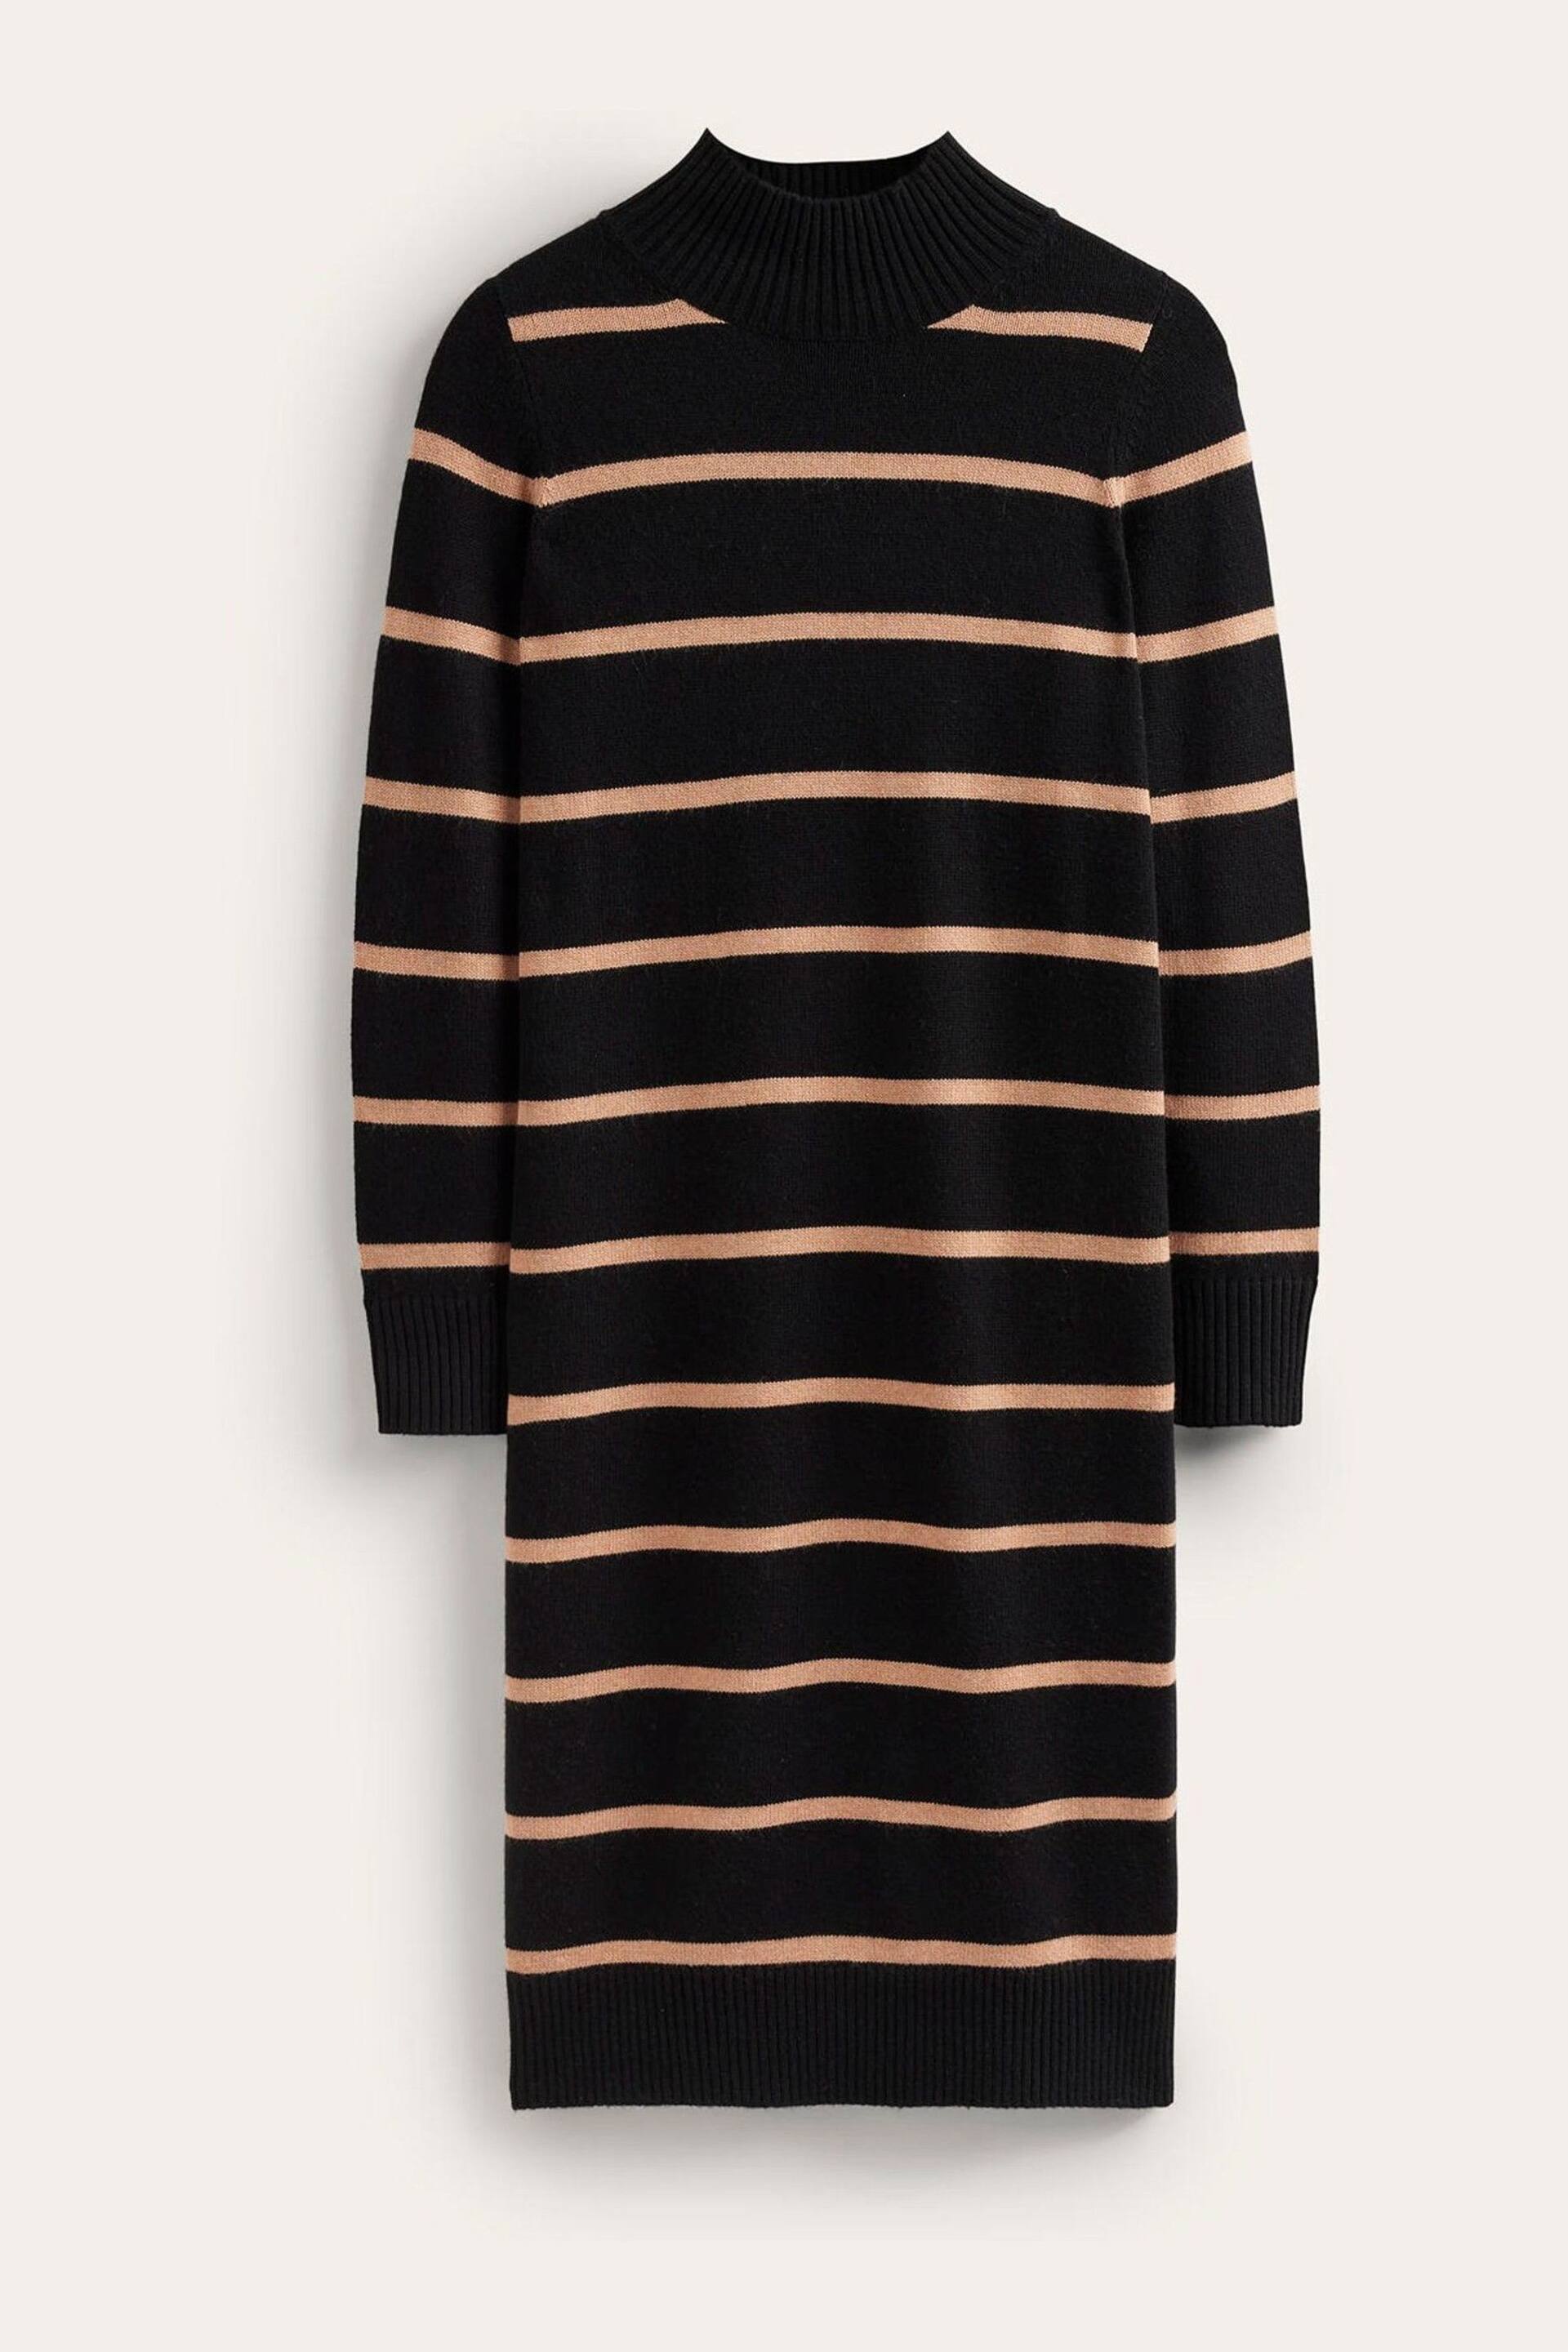 Boden Black Verity Knitted Dress - Image 5 of 6